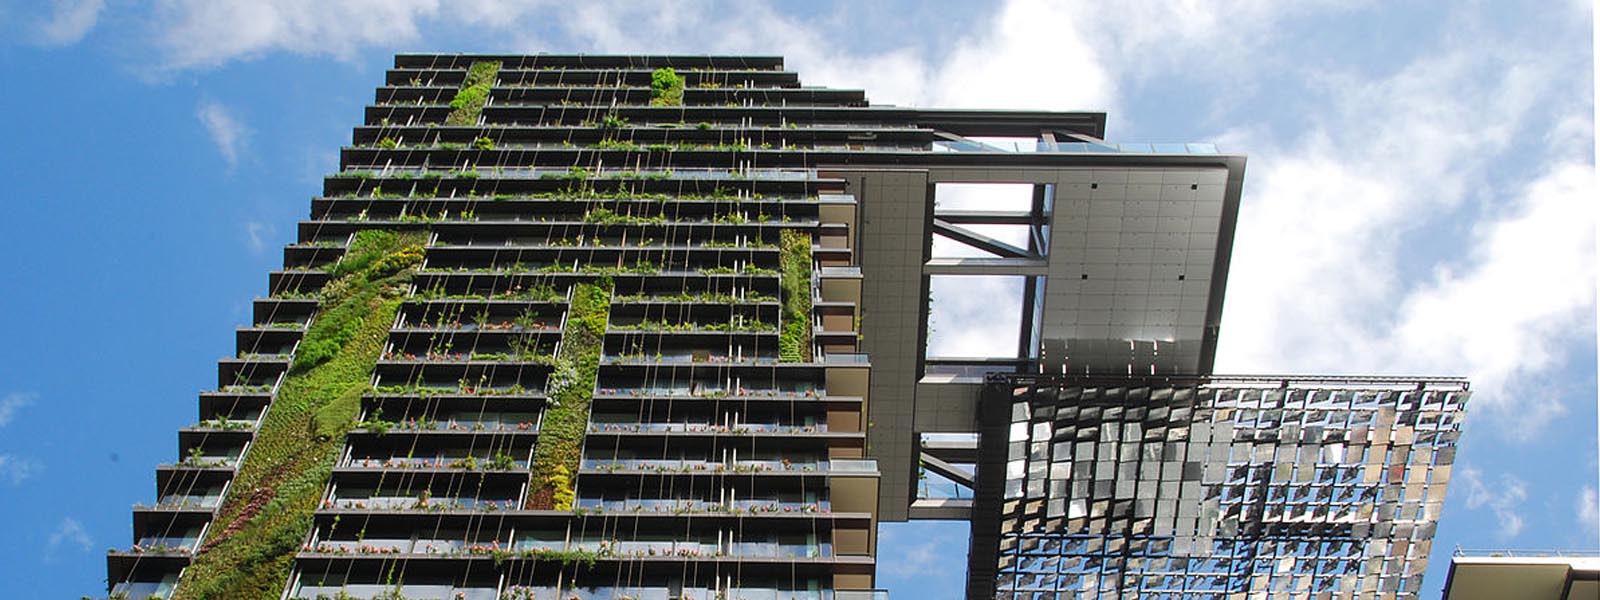 A high rise building with solar panels and greenery